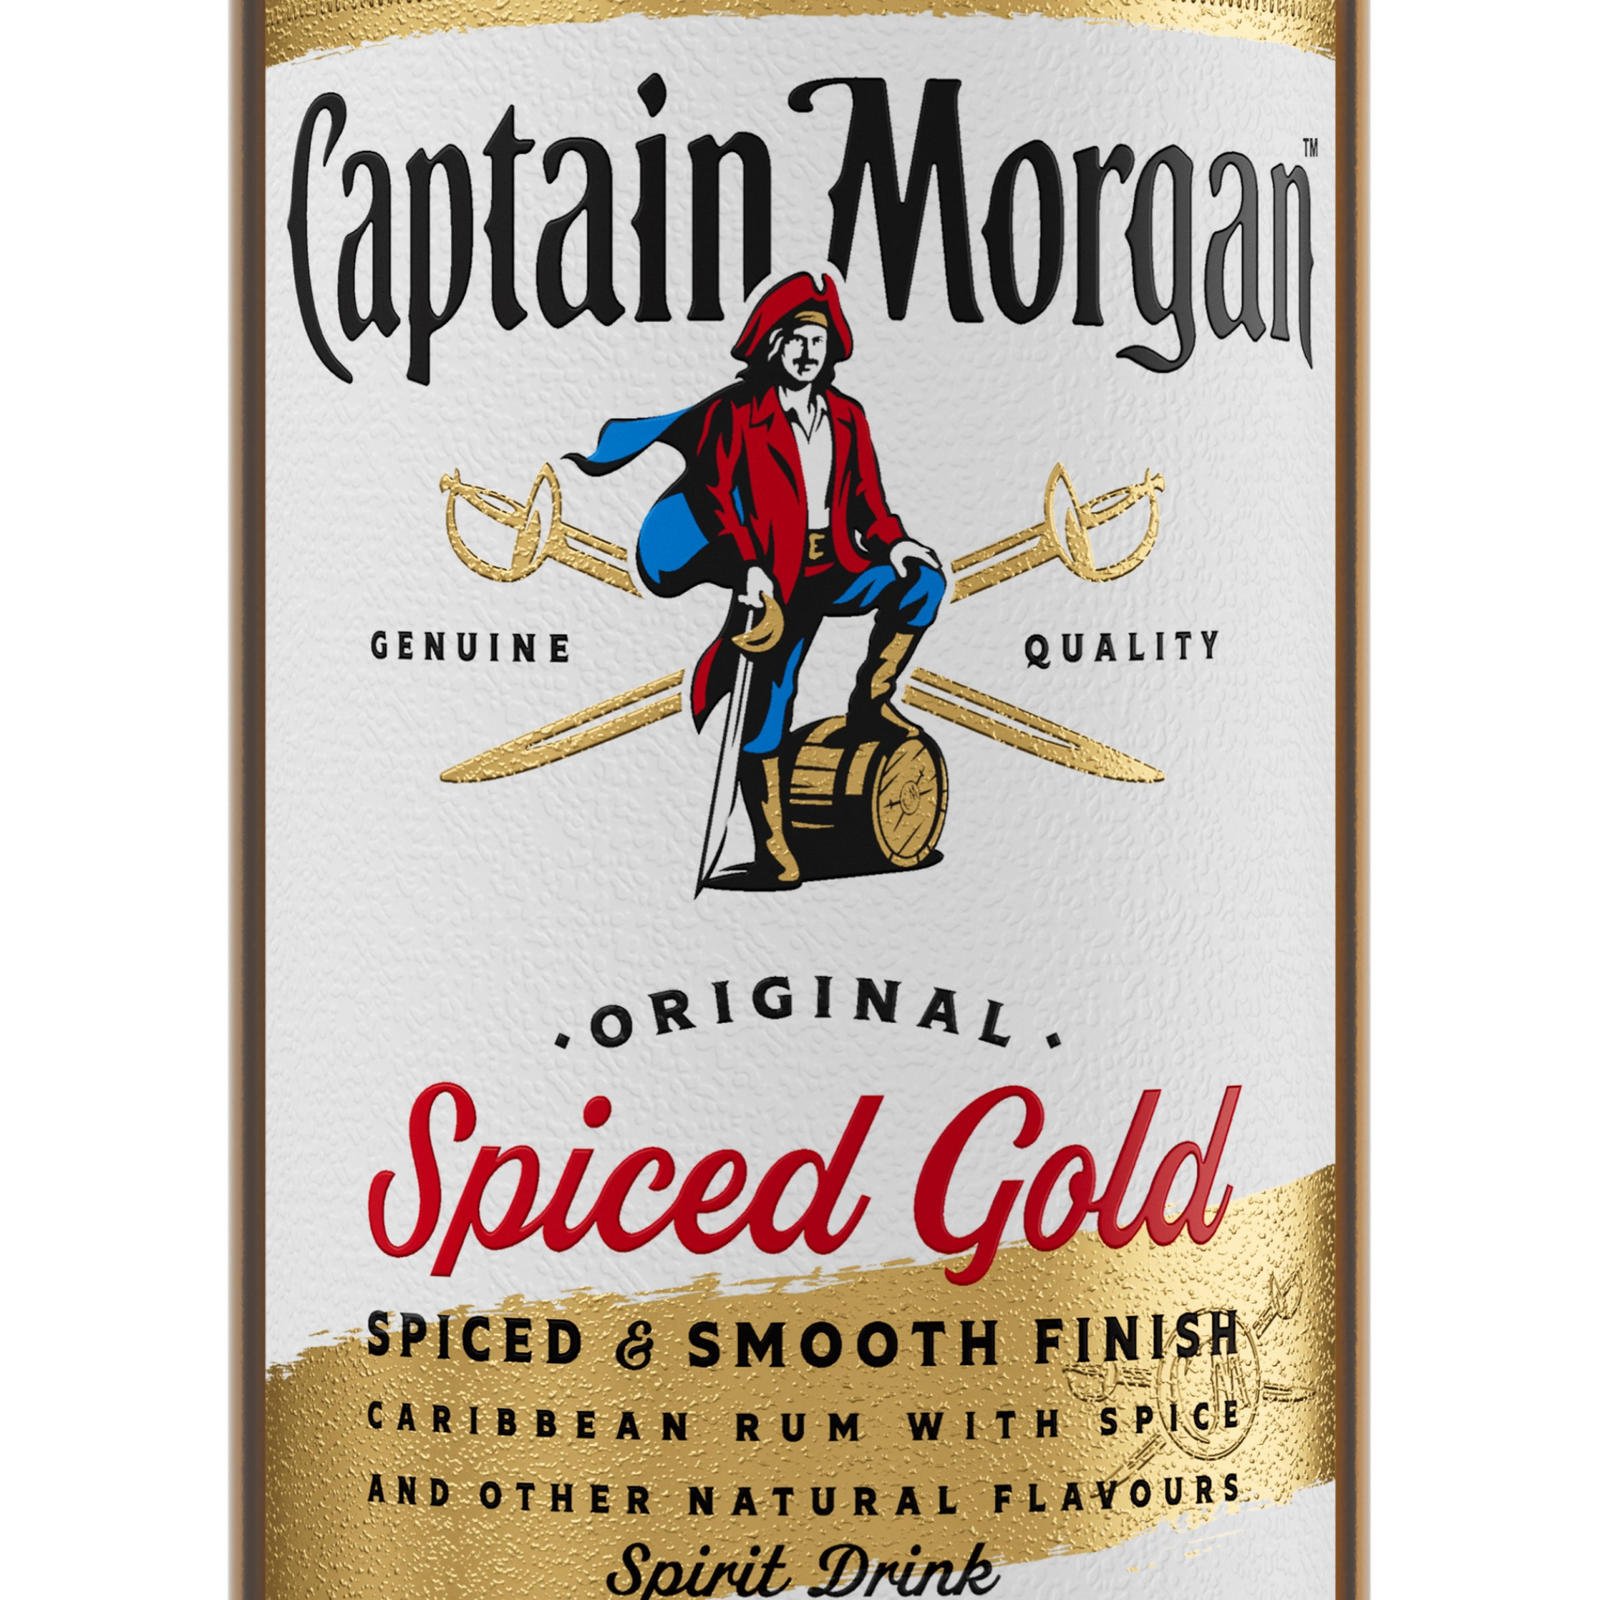 new Spiced Gold label featuring the new, less fun Captain Morgan design